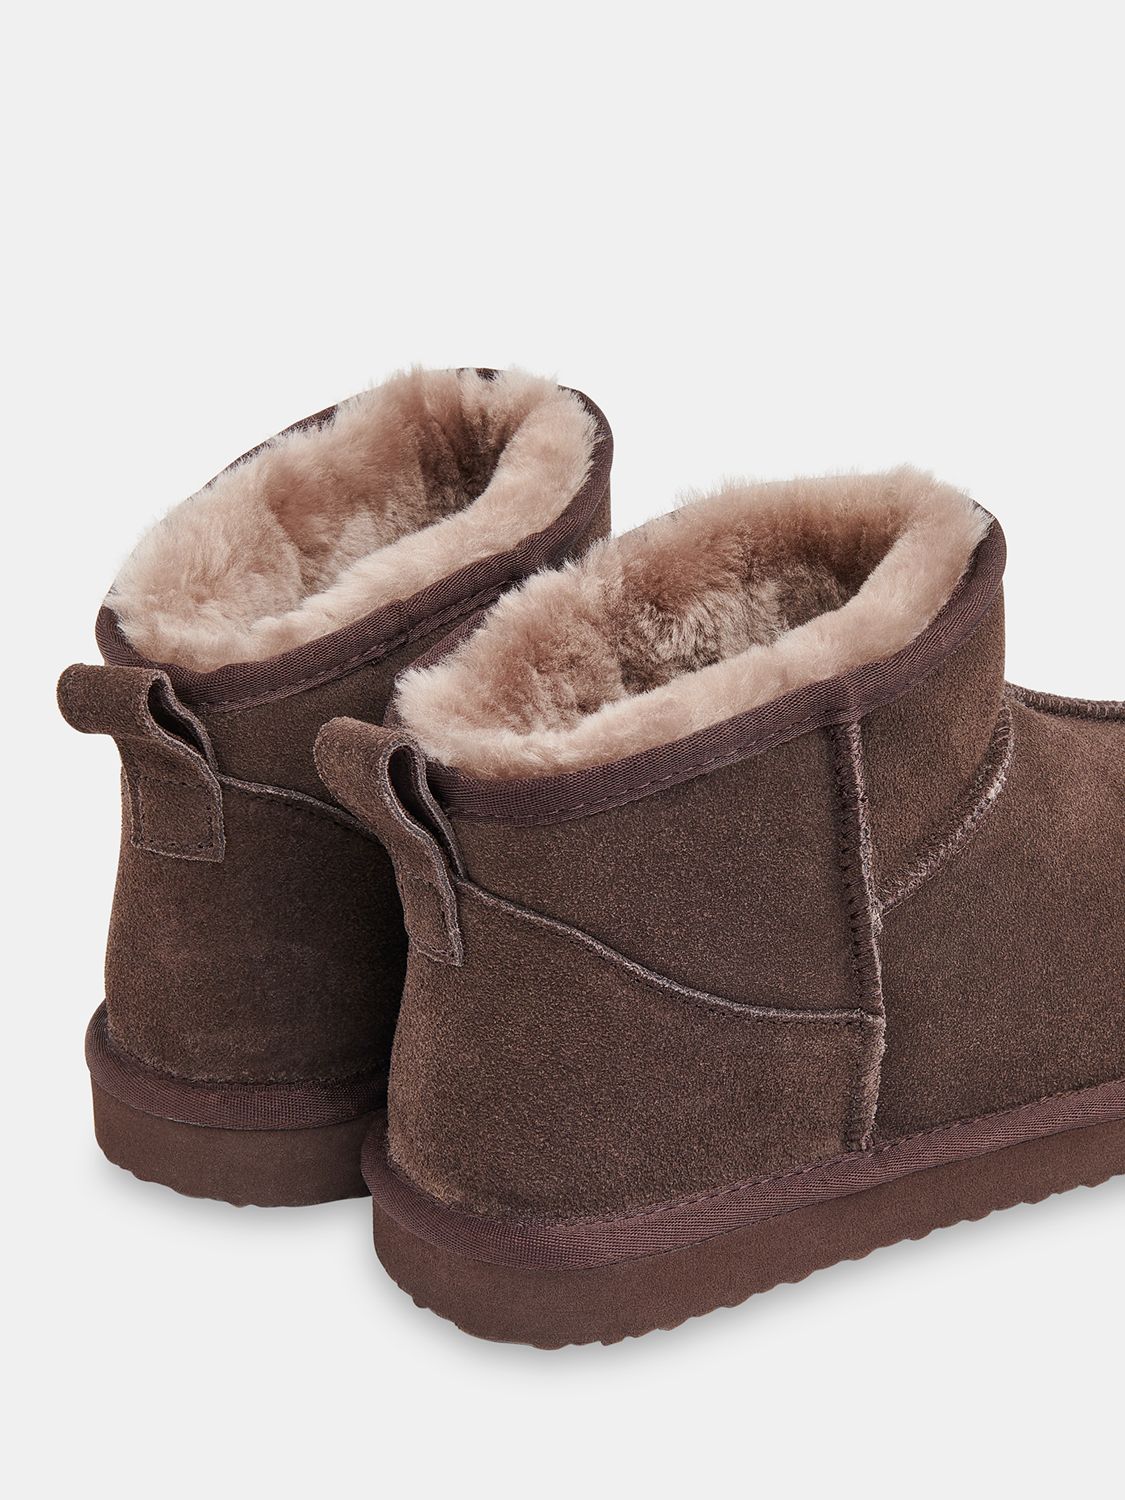 Buy Whistles Mable Suede Slipper Boots, Taupe Online at johnlewis.com